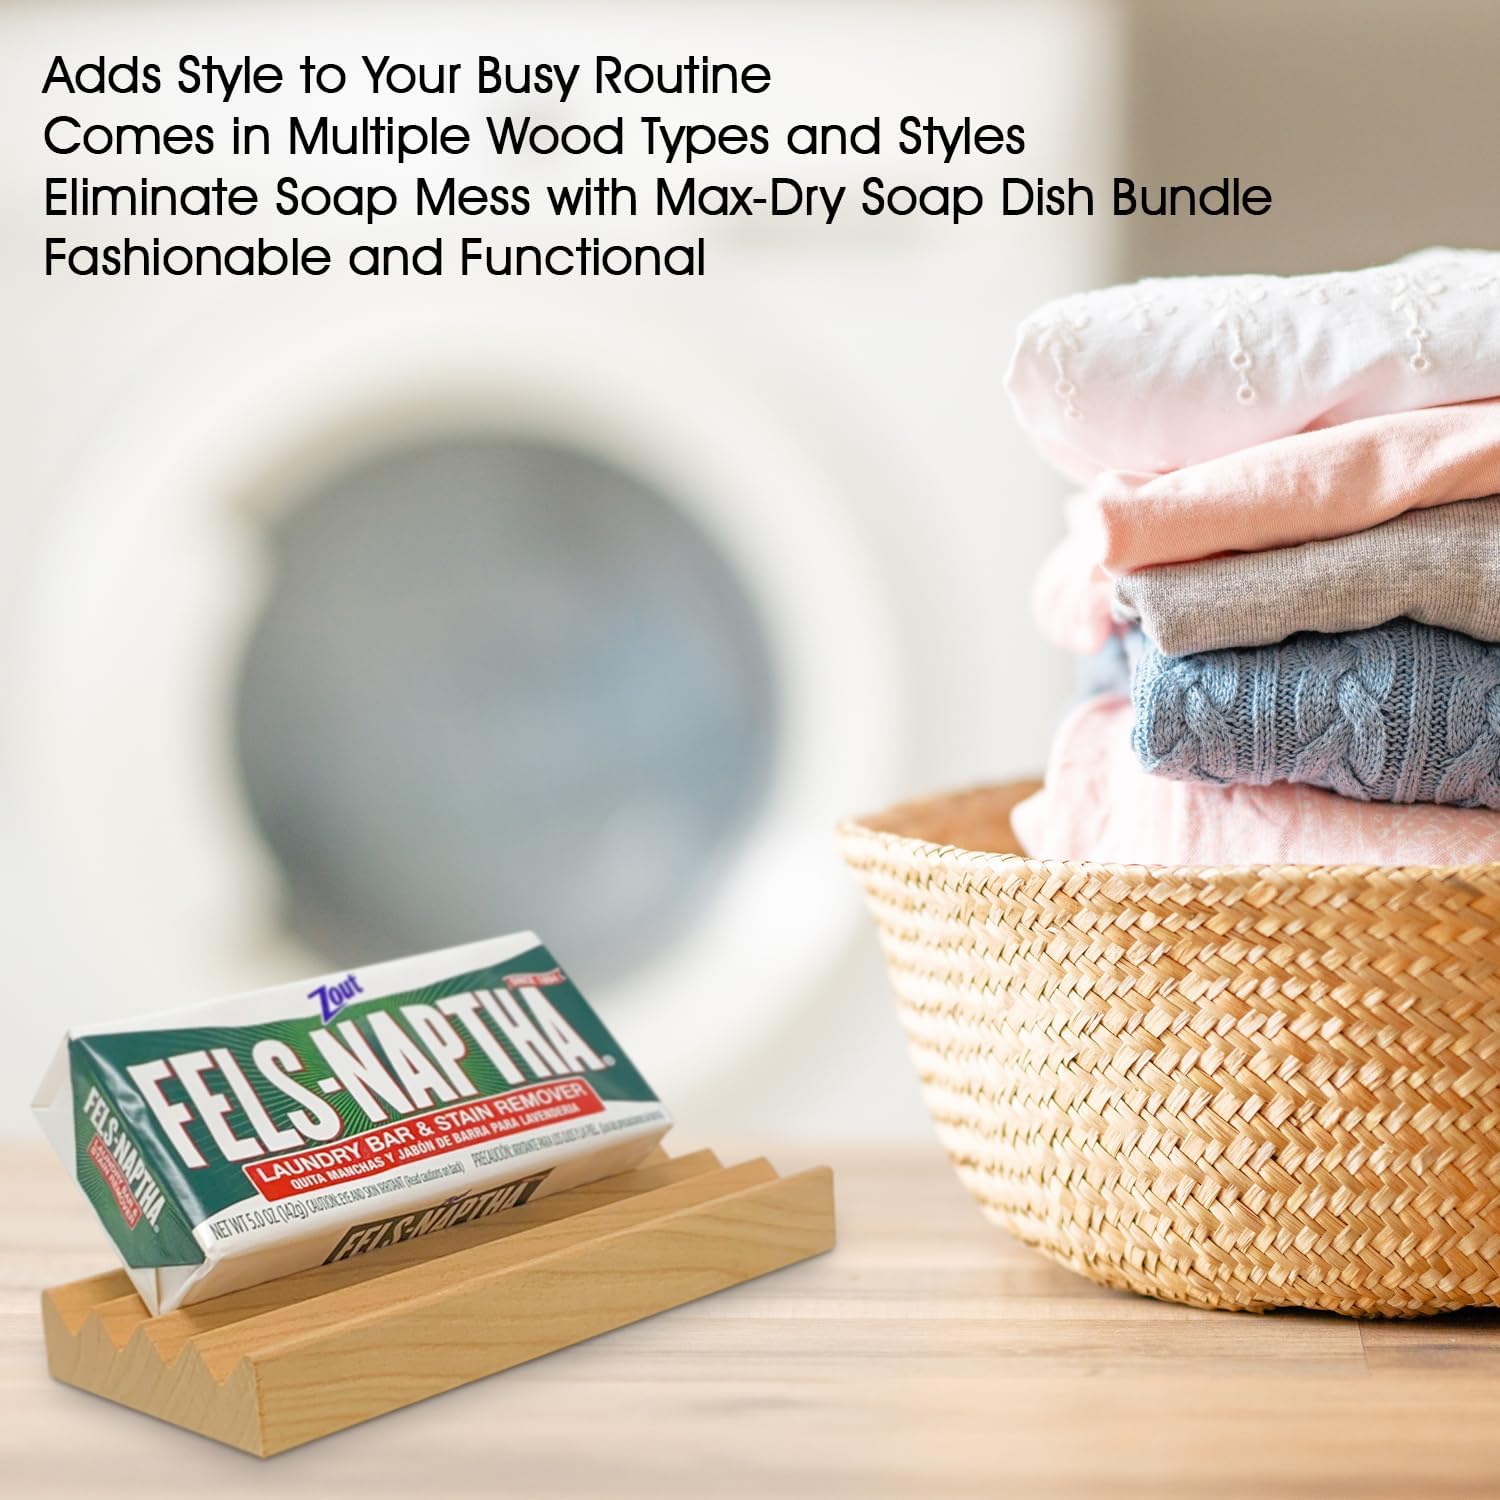 Fels Naptha Laundry Detergent Bar - 5 Ounce Fels Naptha Laundry Bar Soap and Stain Remover Bundle. Get the Ultimate Accessory to your Fels Naptha Soap Bars. (Traditional) : Health & Household